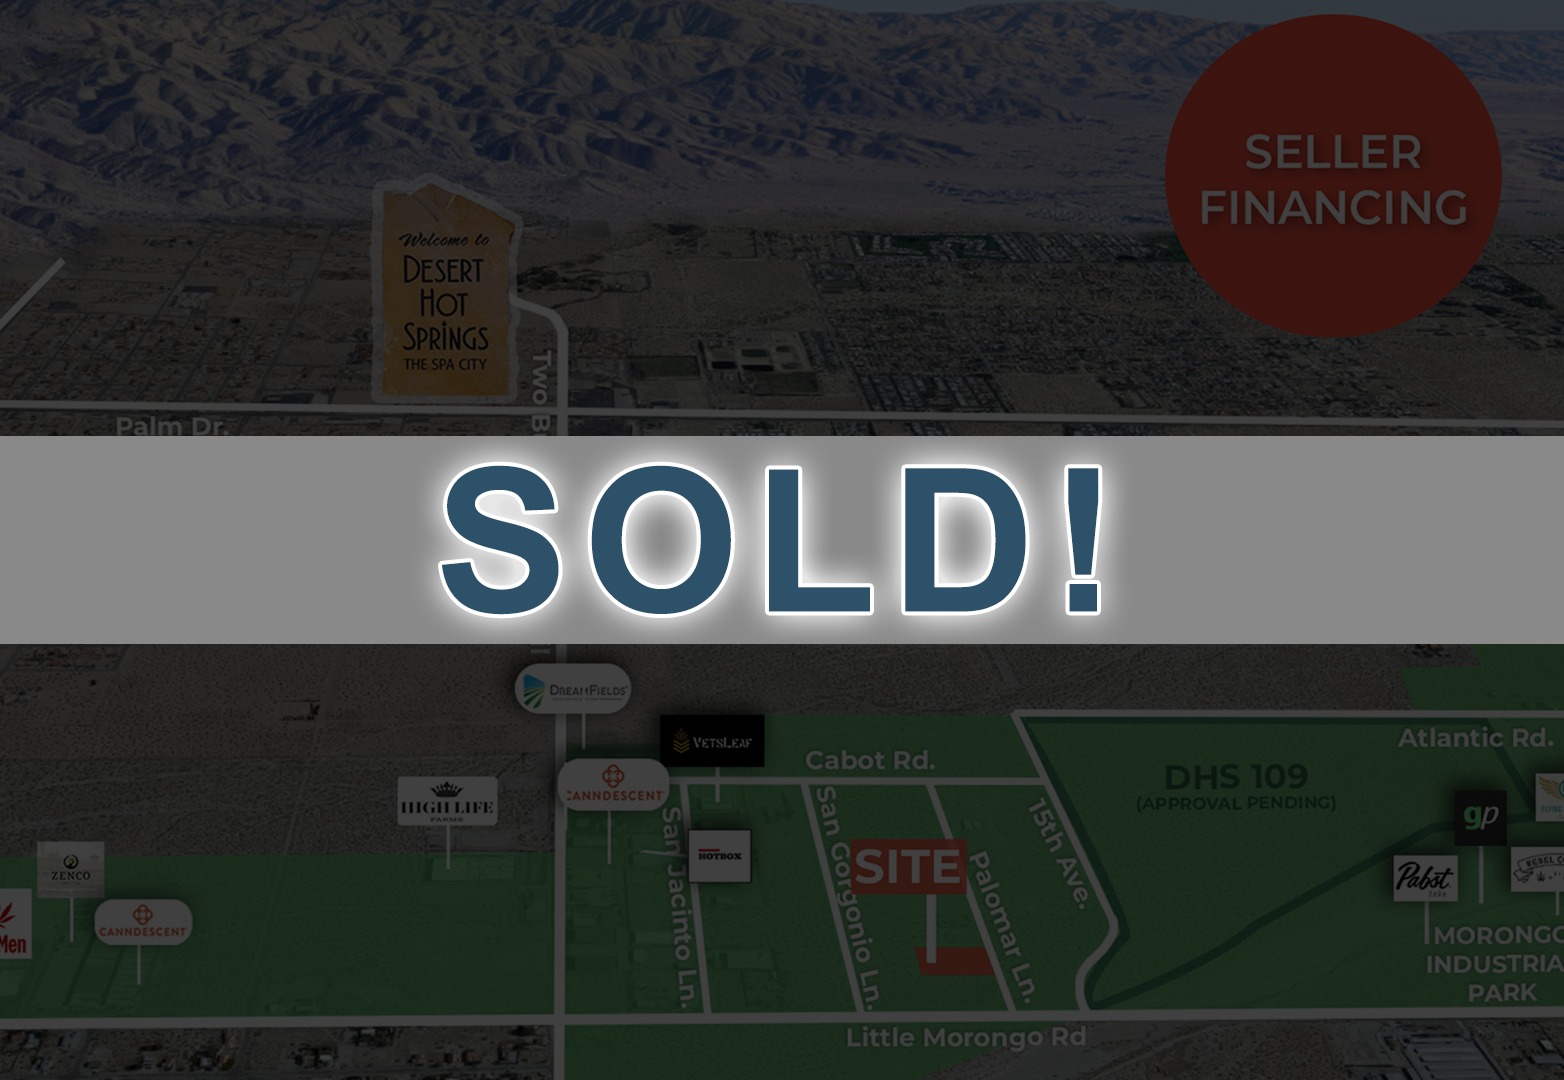 1.26 AC N Palomar Ln, DHS Featured Web - Sold